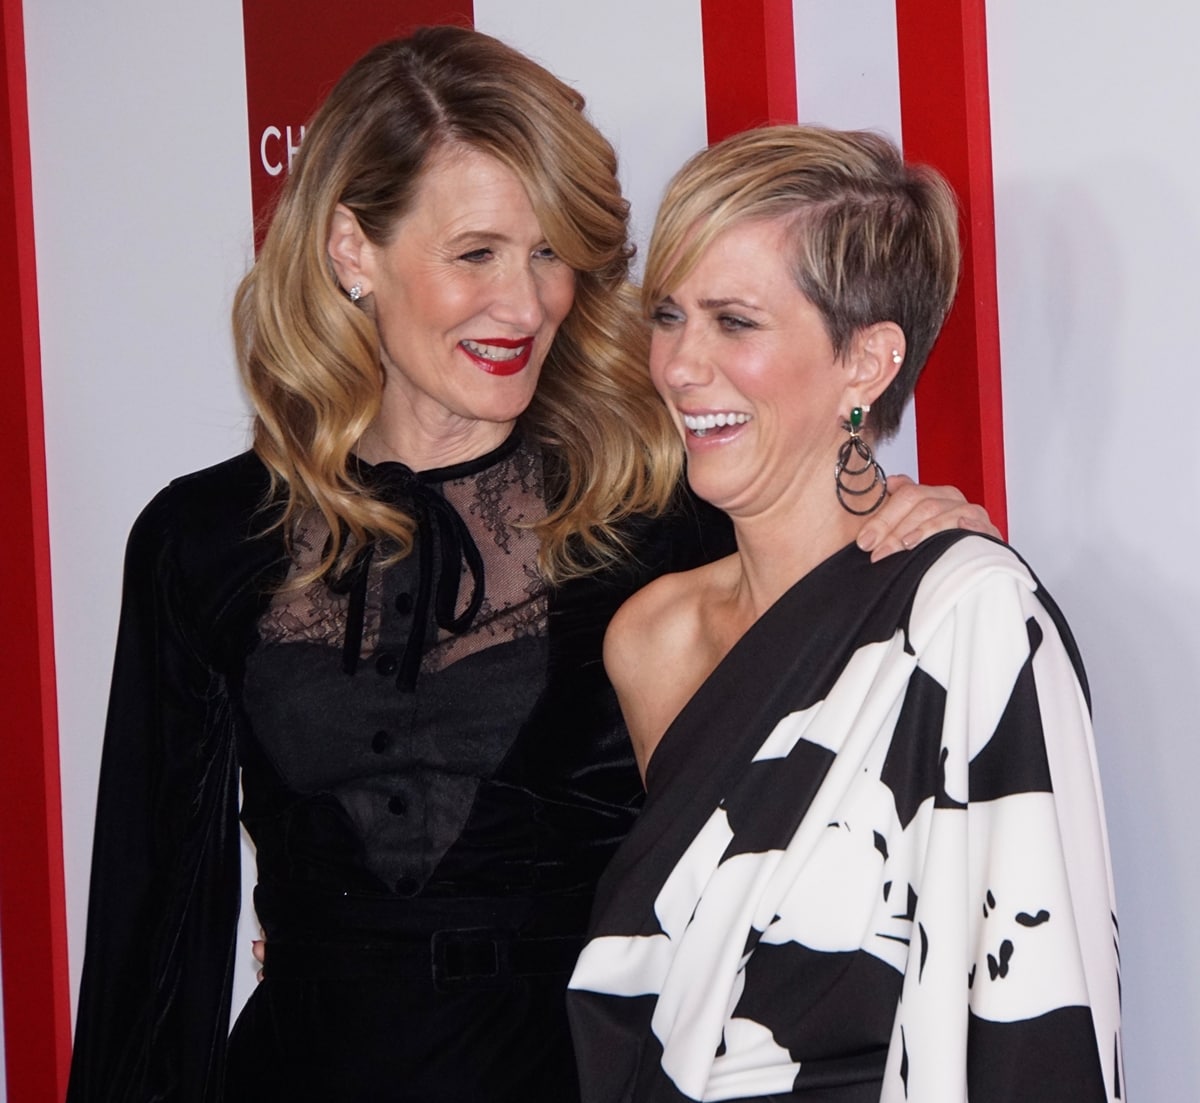 Laura Dern is notably taller than Kristen Wiig, with a height of 5 feet 9 ½ inches (176.5 cm) compared to Kristen Wiig's height of 5 feet 5 ½ inches (166.4 cm)